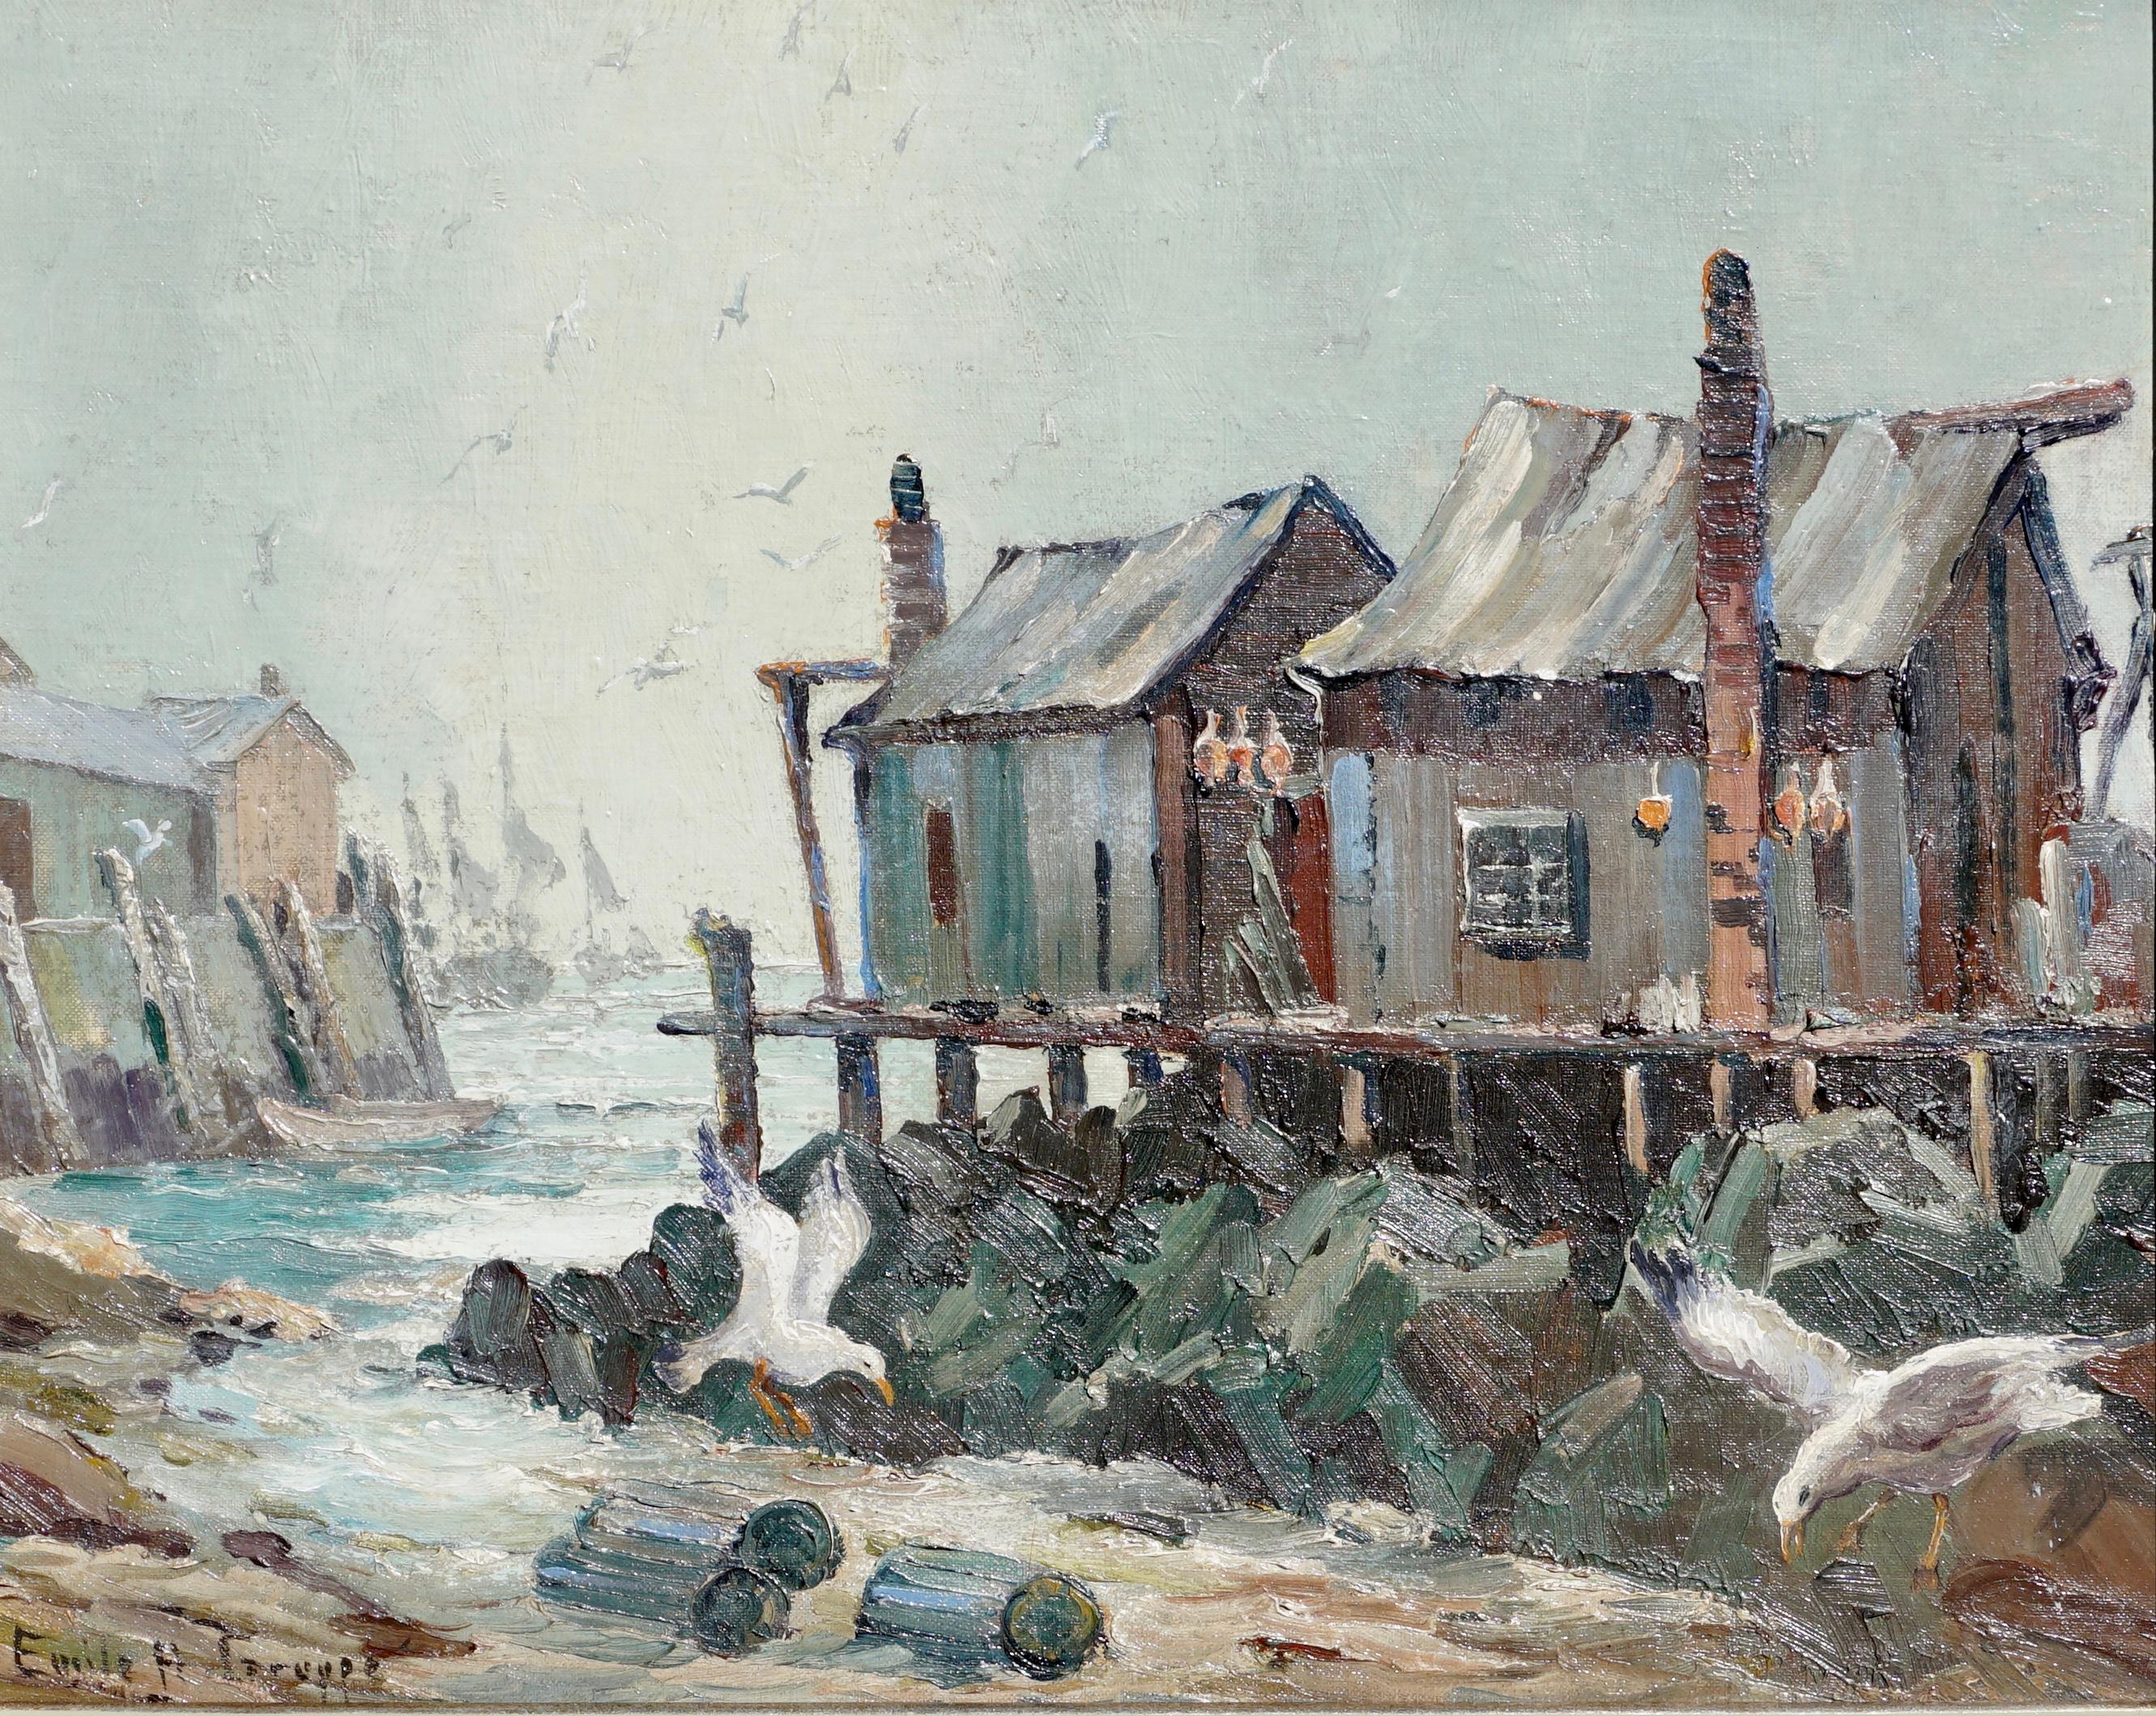 Emile Gruppe (American, 1896-1978), oil on canvas board, circa 1940.

An absolutely amazing post impressionist painting using knifing technique which is very rare for Gruppe. The painting shows shacks at low tide when the fishing boats are out